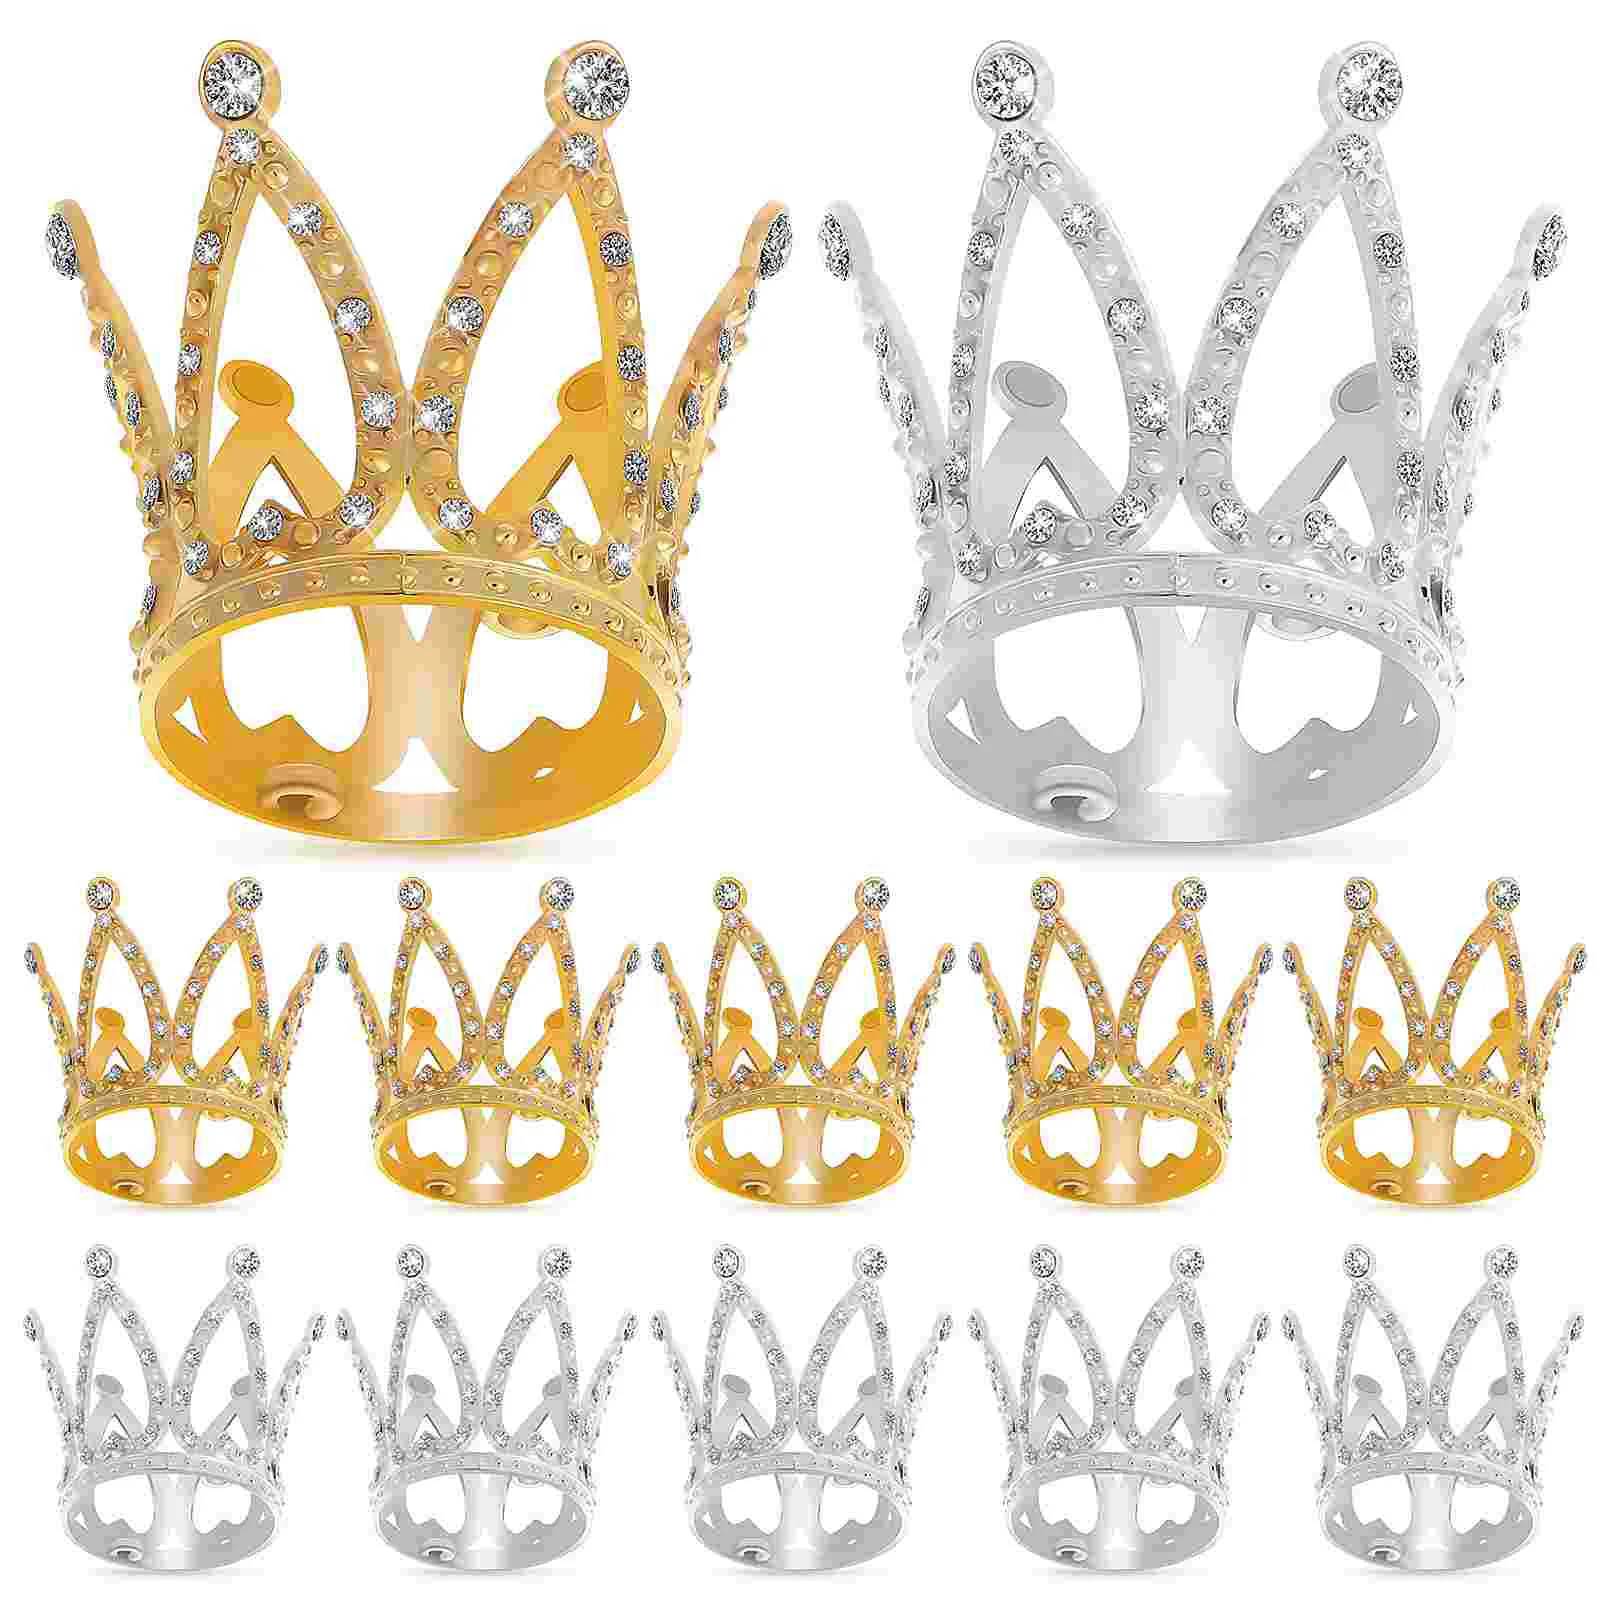 

12 Pcs Mini Crowns Small Crowns Rhinestones Crowns Cake Toppers Cake Decorations for Parties